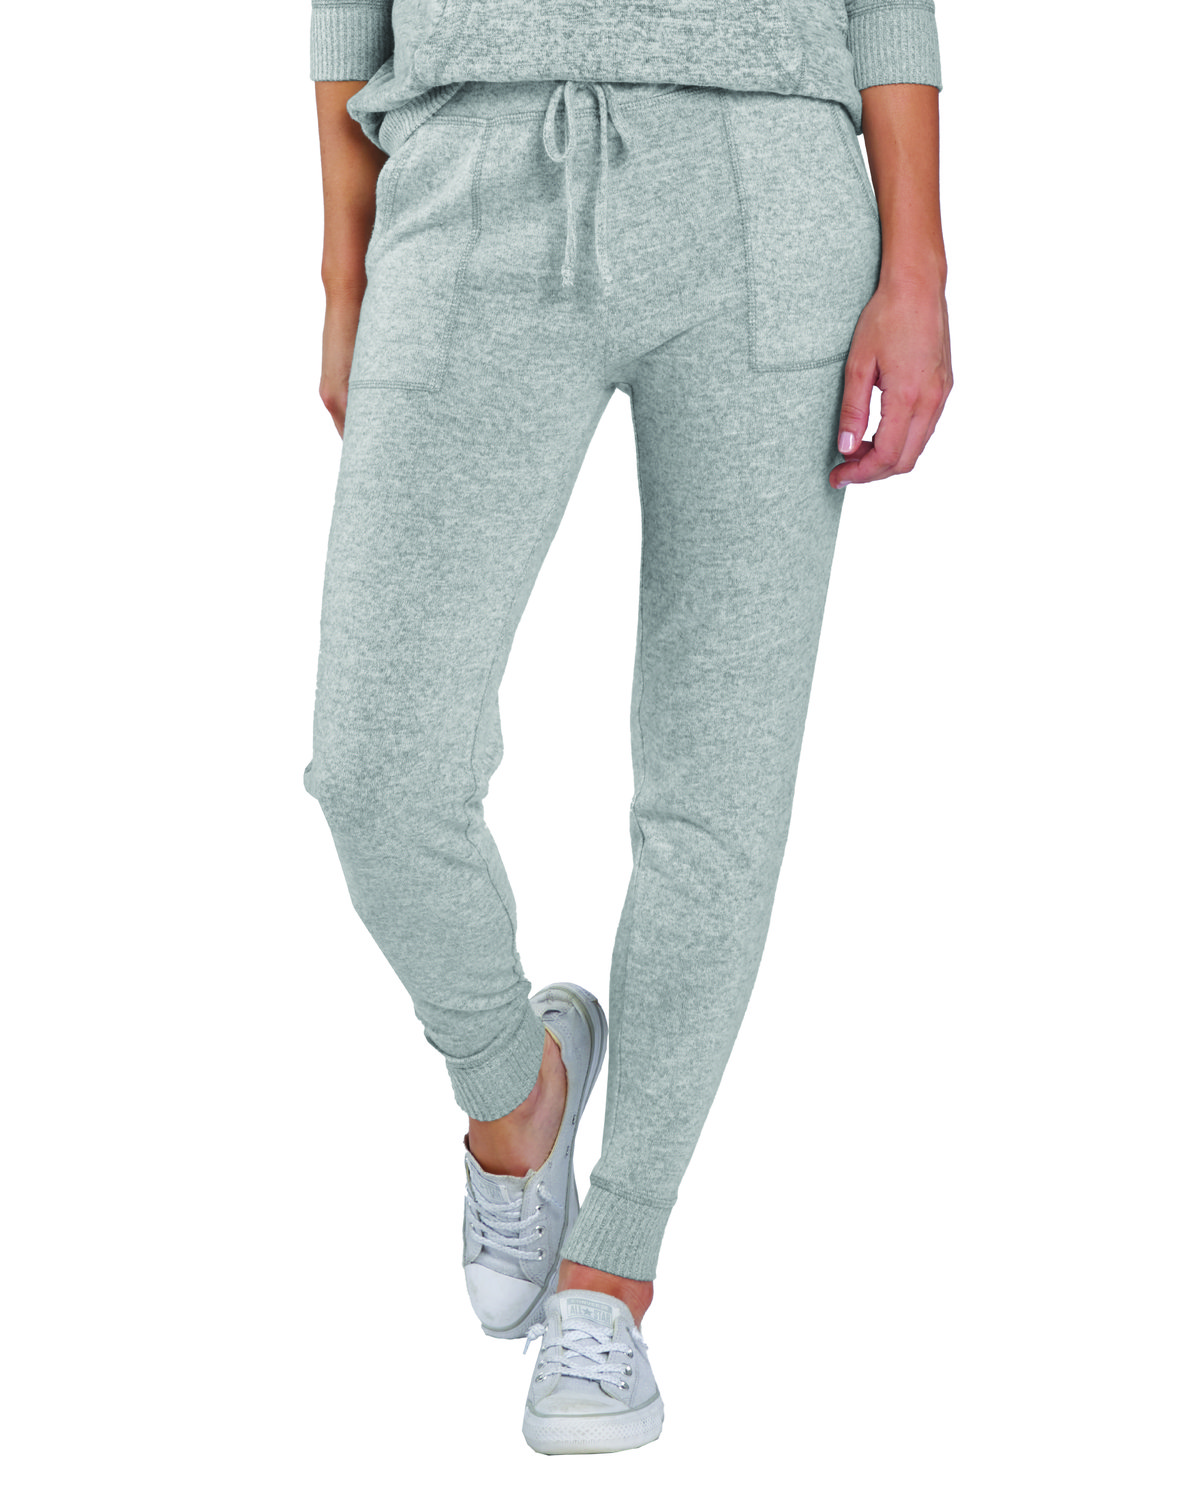 Boxercraft Ladies' Cuddle Soft Jogger Pant with Pockets | alphabroder